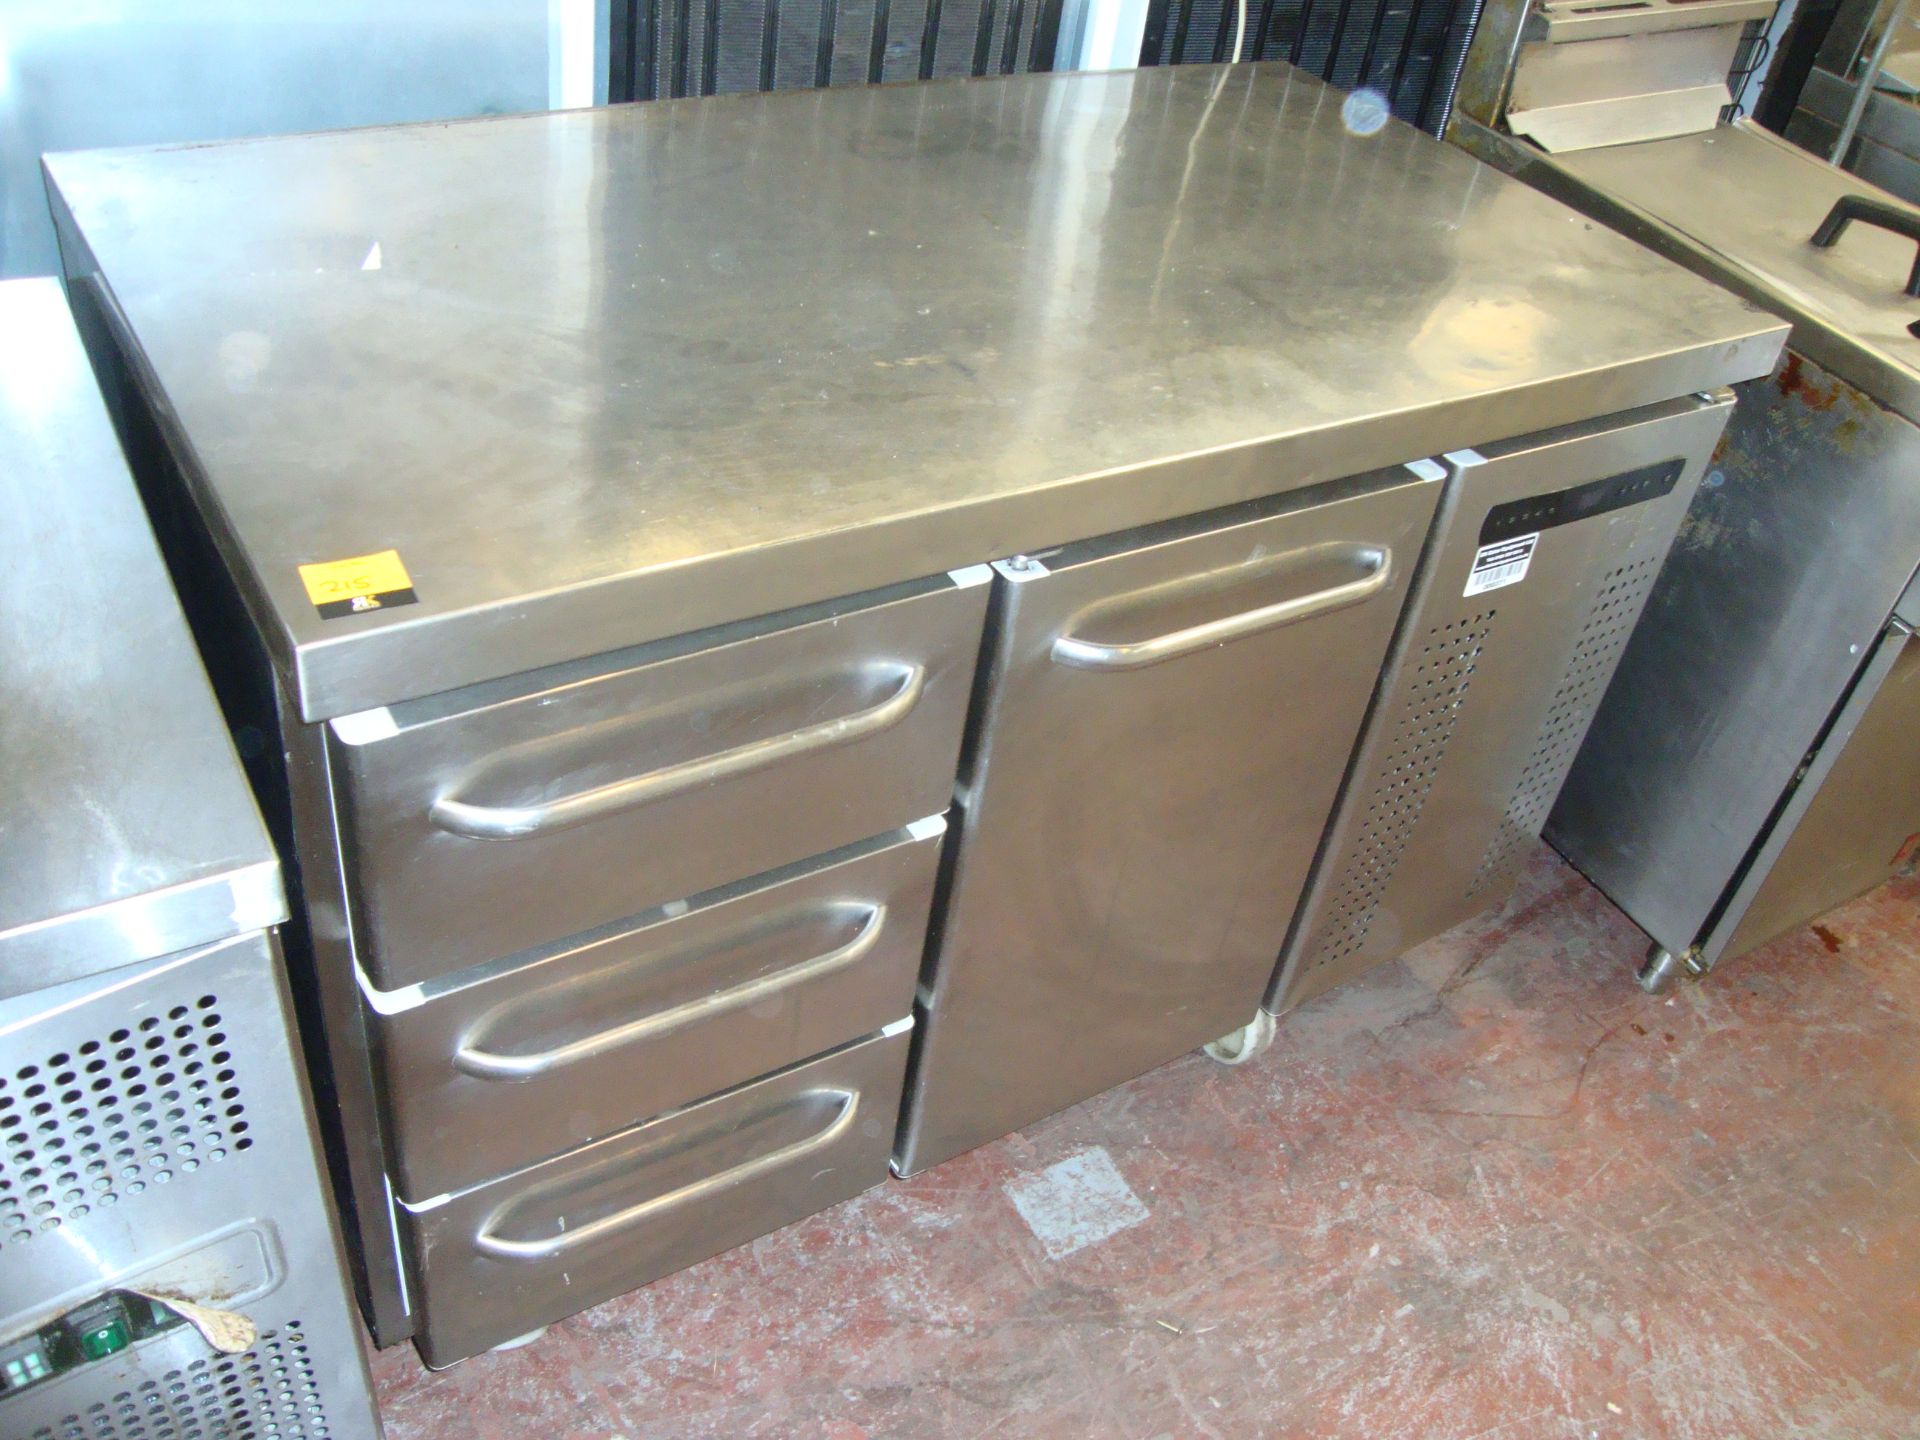 Stainless steel mobile refrigerated prep unit with slide out refrigerated drawers plus cupboard